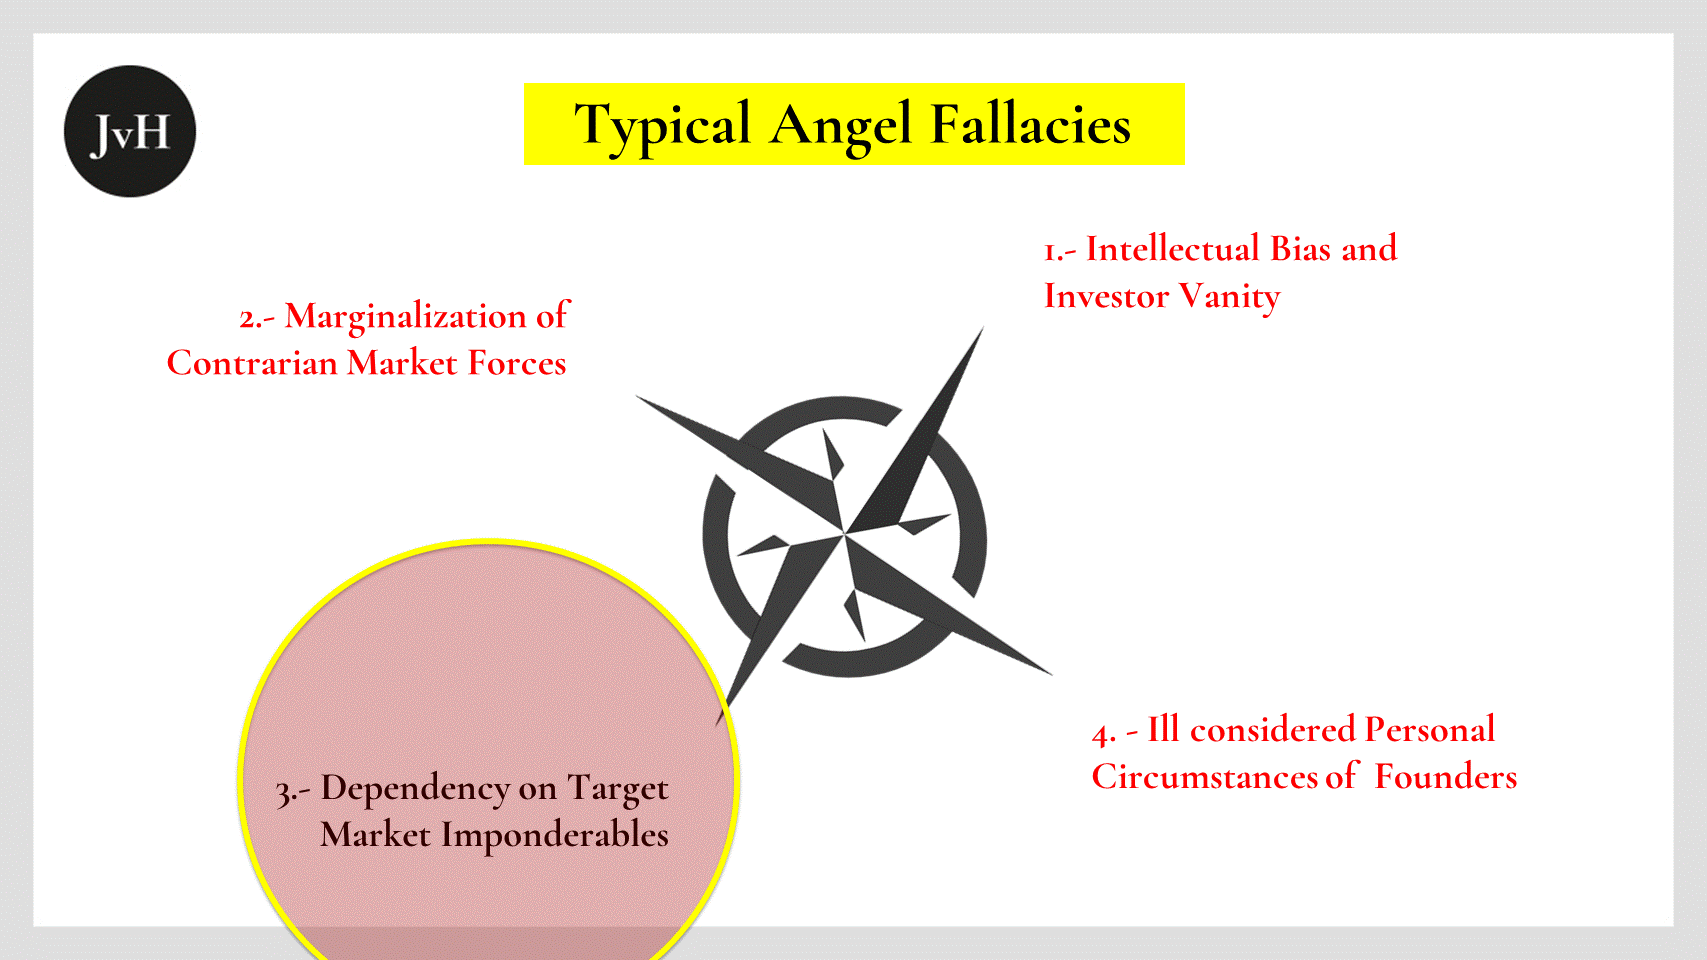 Typical Angel Fallacies: Neglect Typical Angel Fallacies: Neglect of Contrarian Market Forces